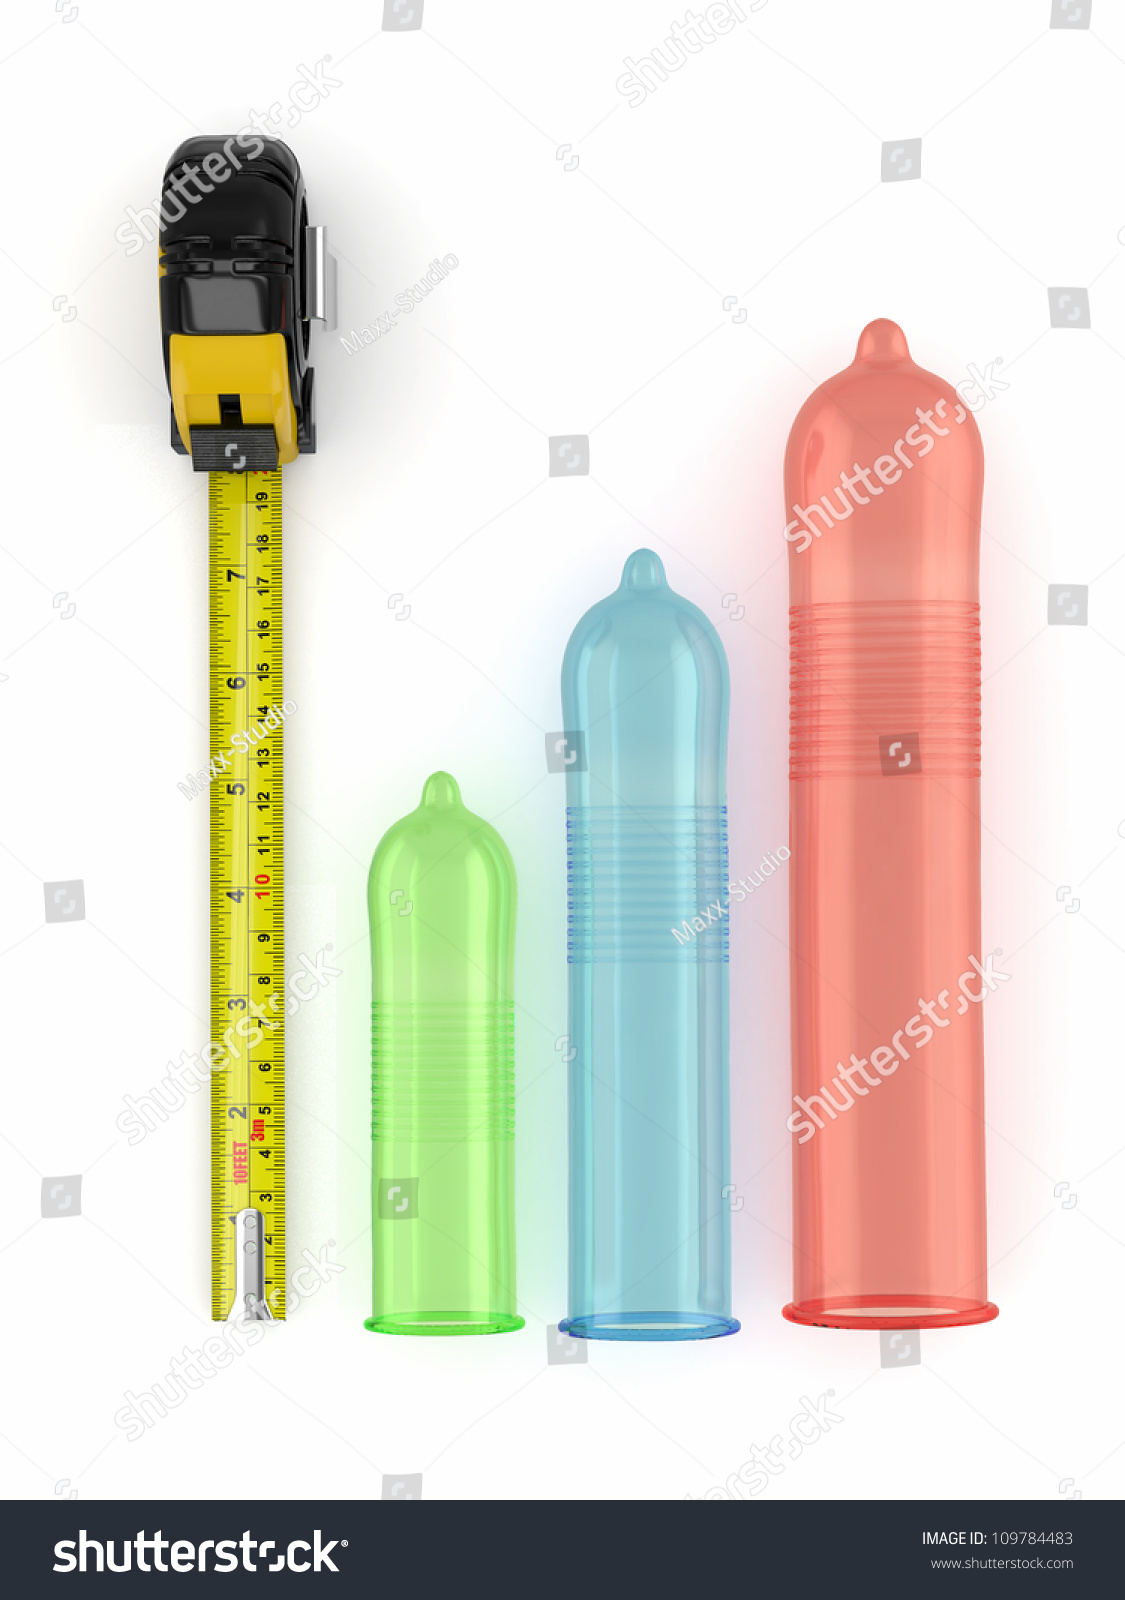 Pictures Of Different Penis Sizes 54